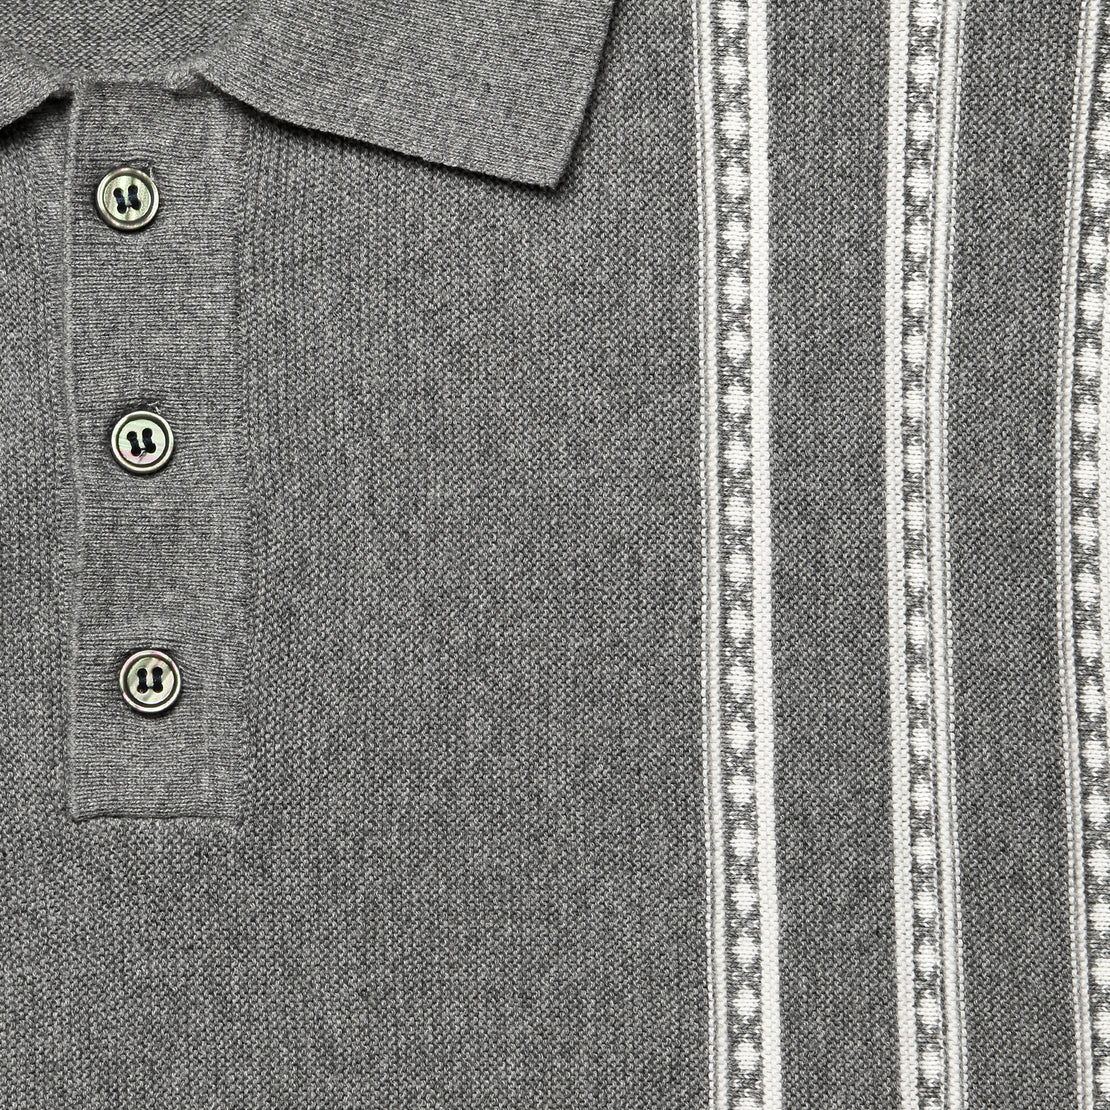 Vintage Jacquard Knit Polo - Grey Heather - Barque - STAG Provisions - Tops - S/S Knit